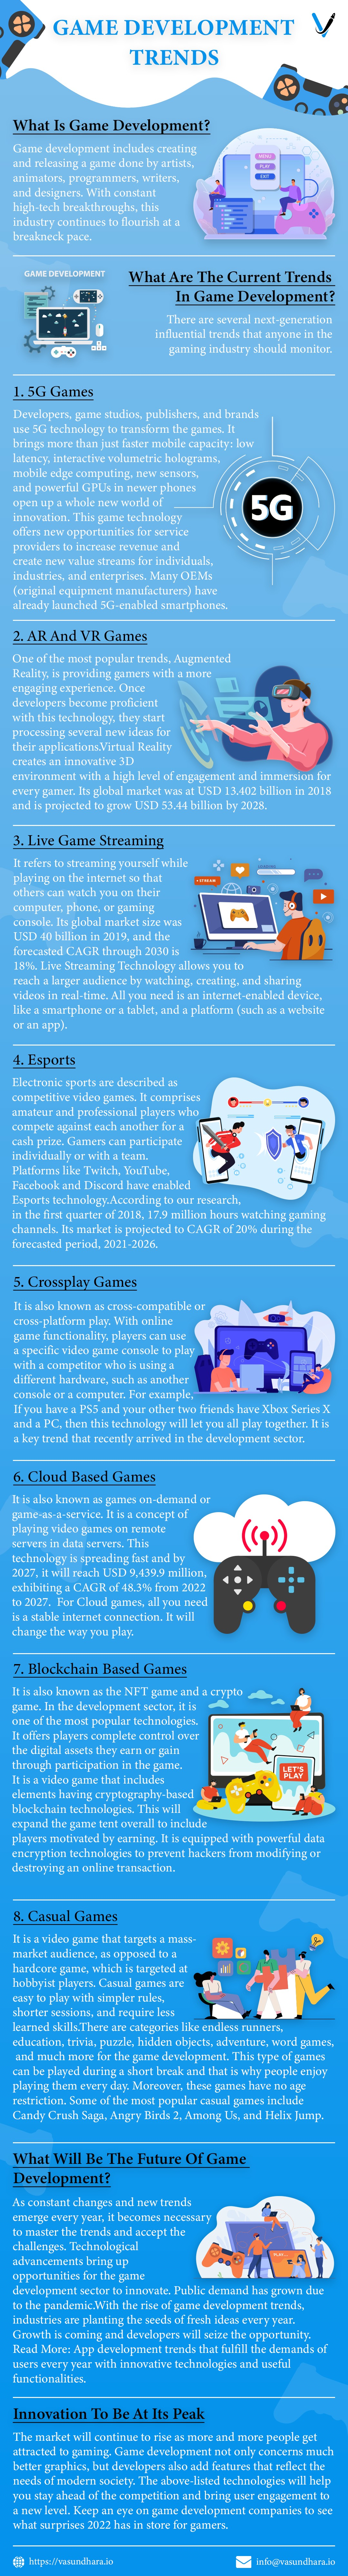 Top Reasons to Use Games in Your Marketing Strategy